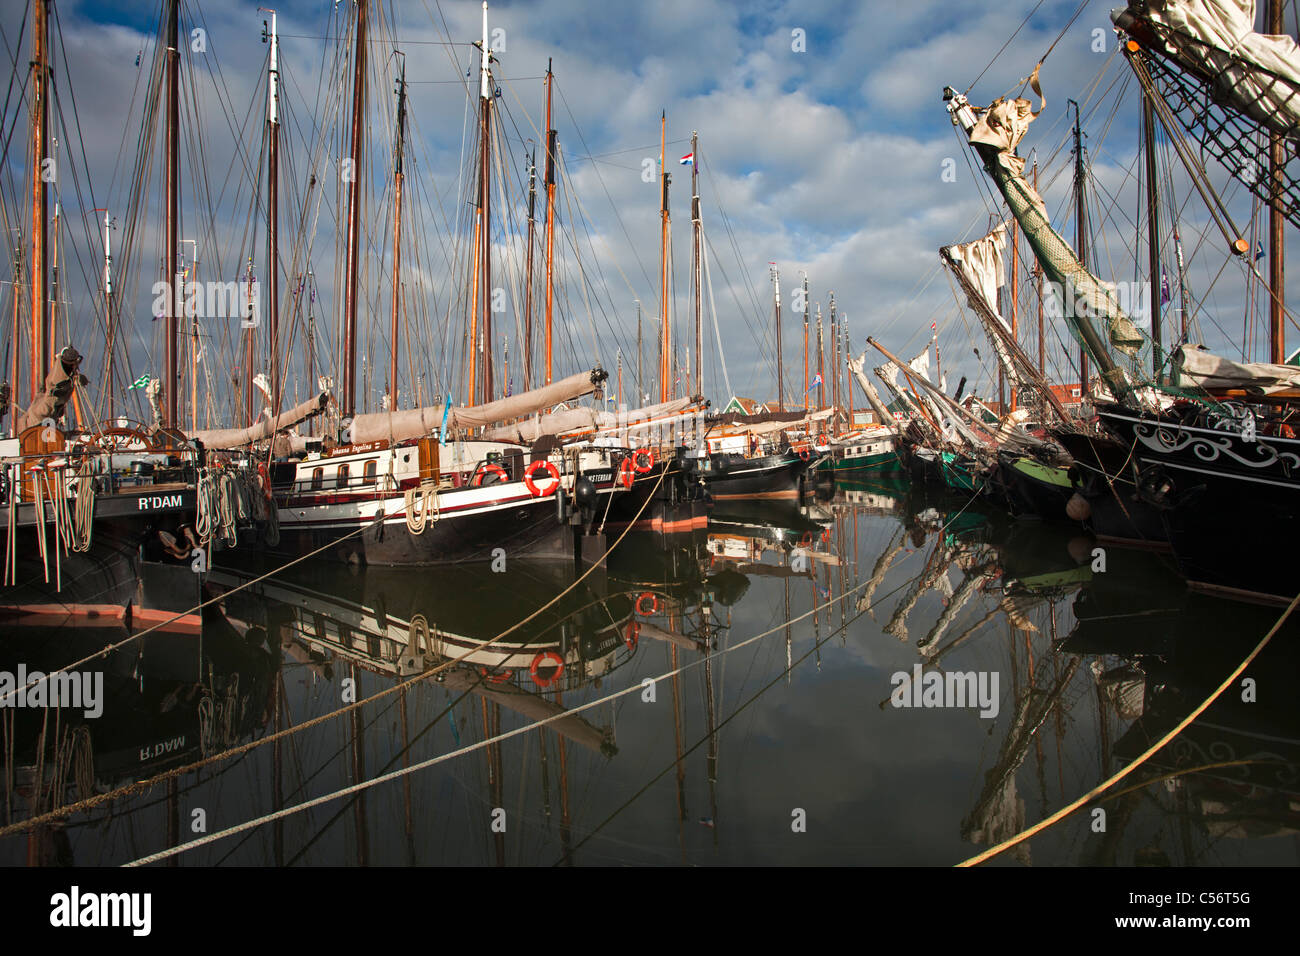 The Netherlands, Volendam, traditional sailing ships in harbour. Stock Photo